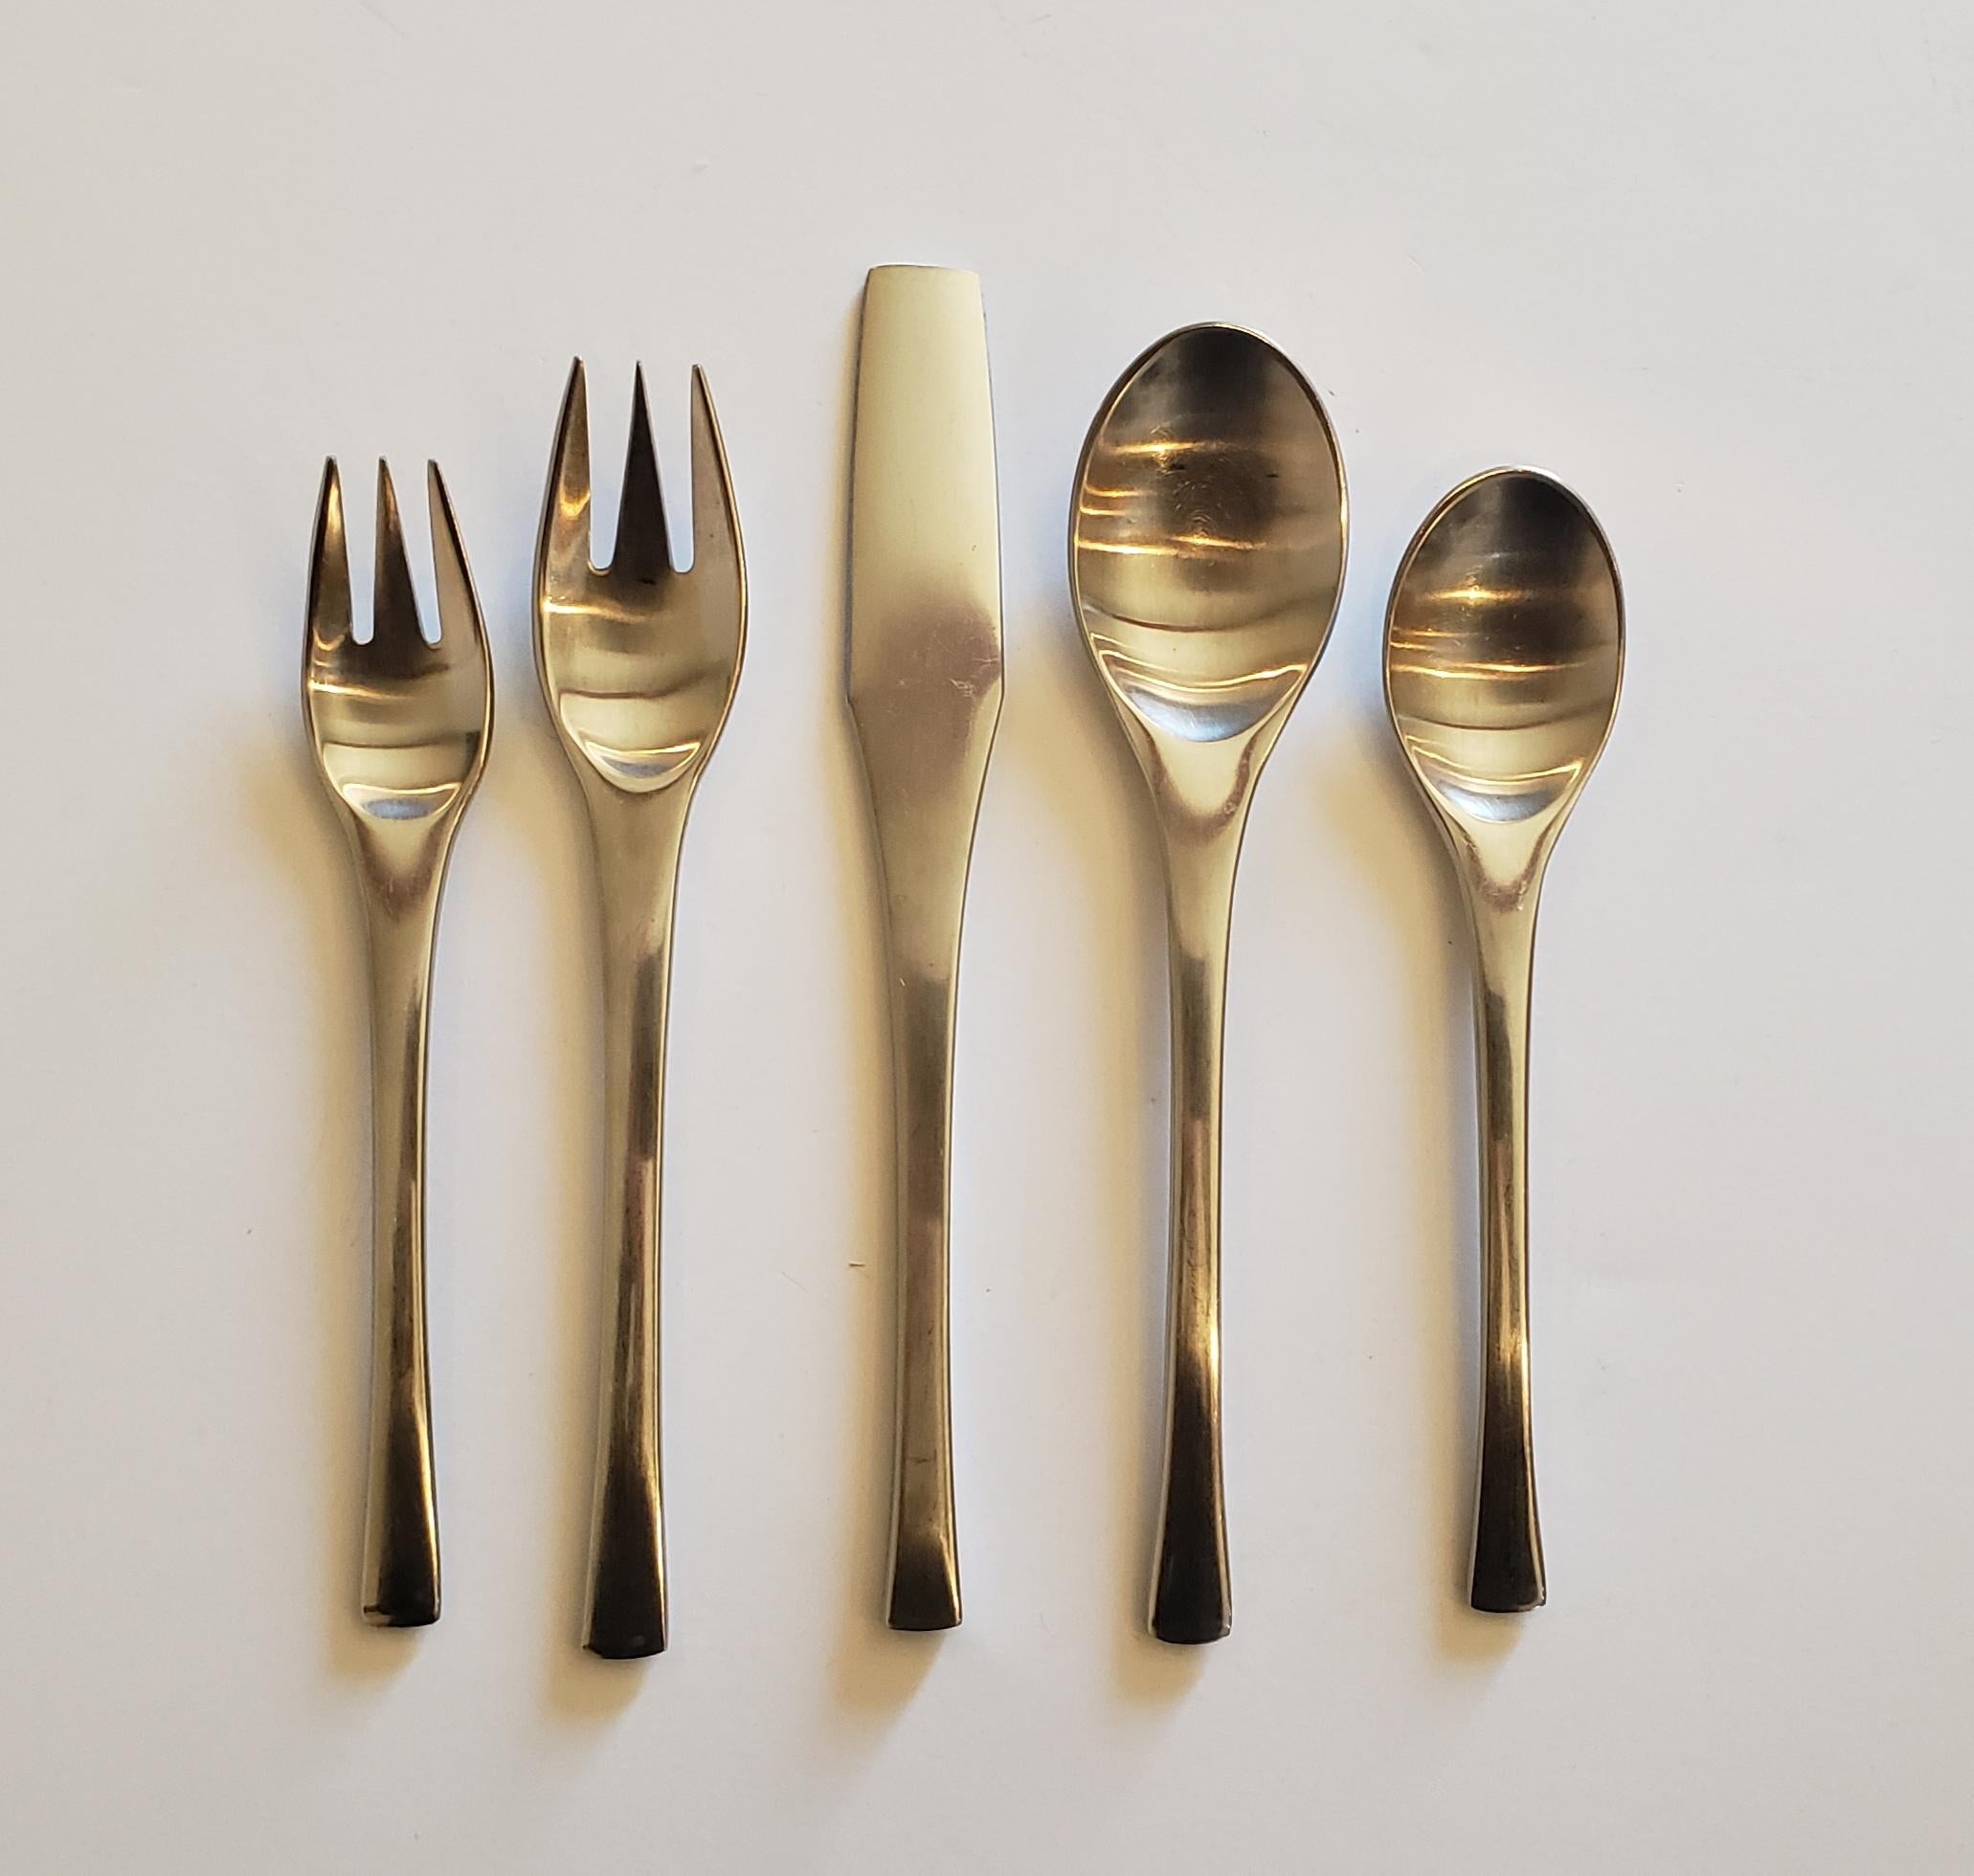 Jens Quistgaard Odin for Dansk Silverware, 40 pieces creating service for 8. This service was manufactured in three different countries, Germany, Korea and Japan. 

Made from high grade stainless of the finest quality.

